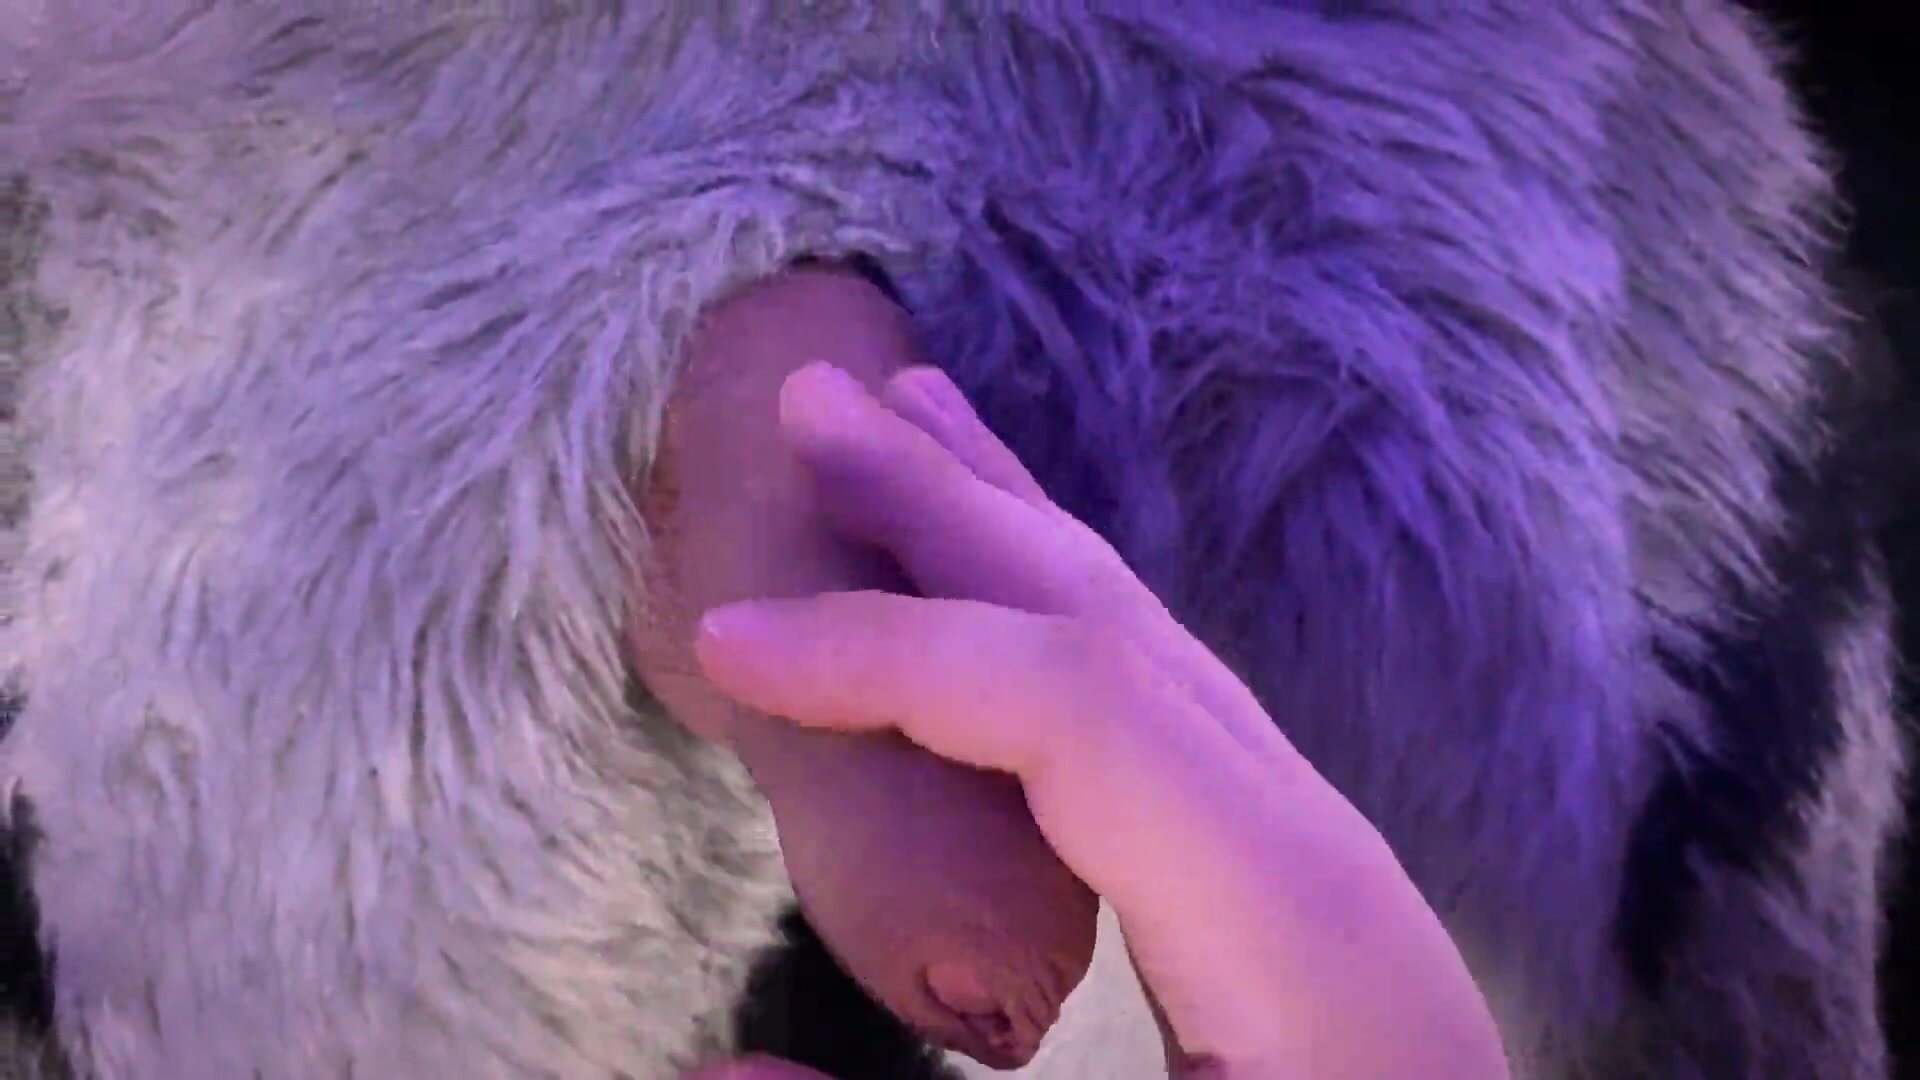 Hung fursuit guy gets his uncut cock fondled and sucked